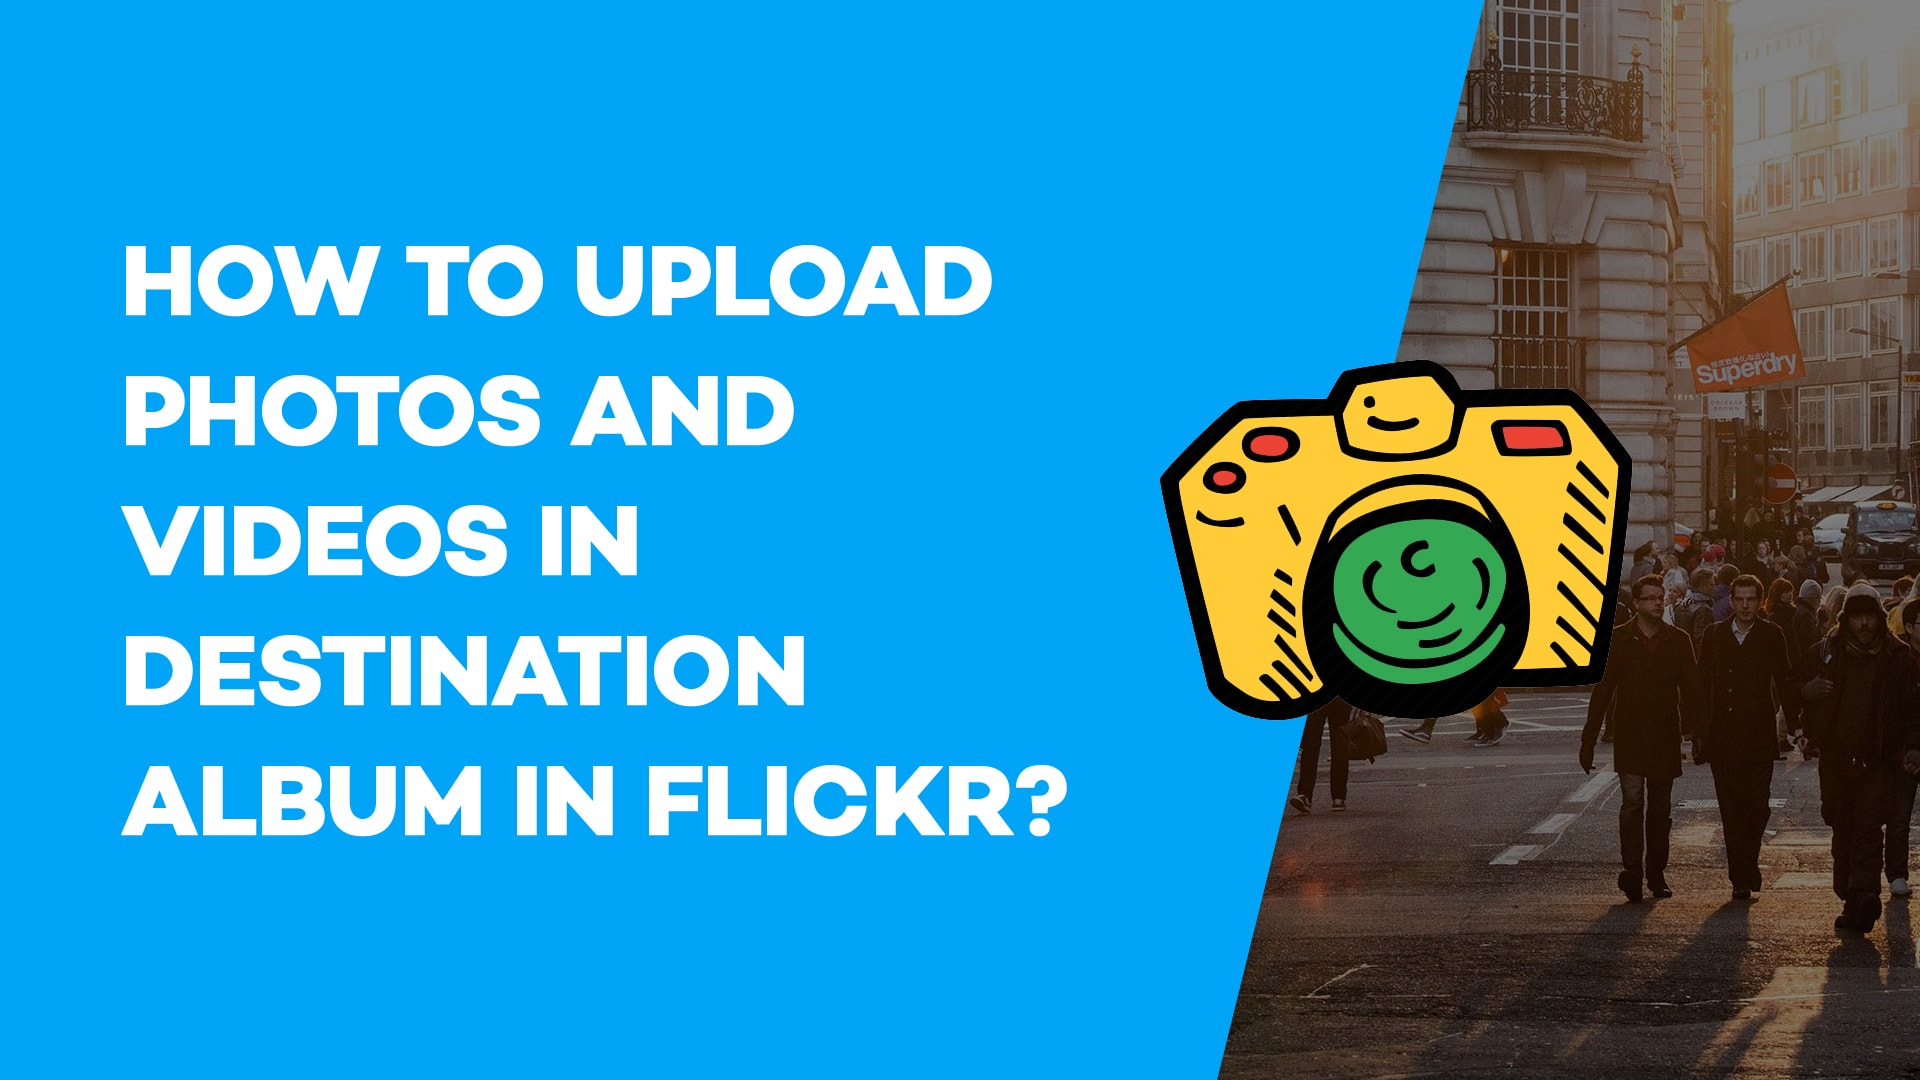 How to upload photos and videos in Destination album in Flickr?